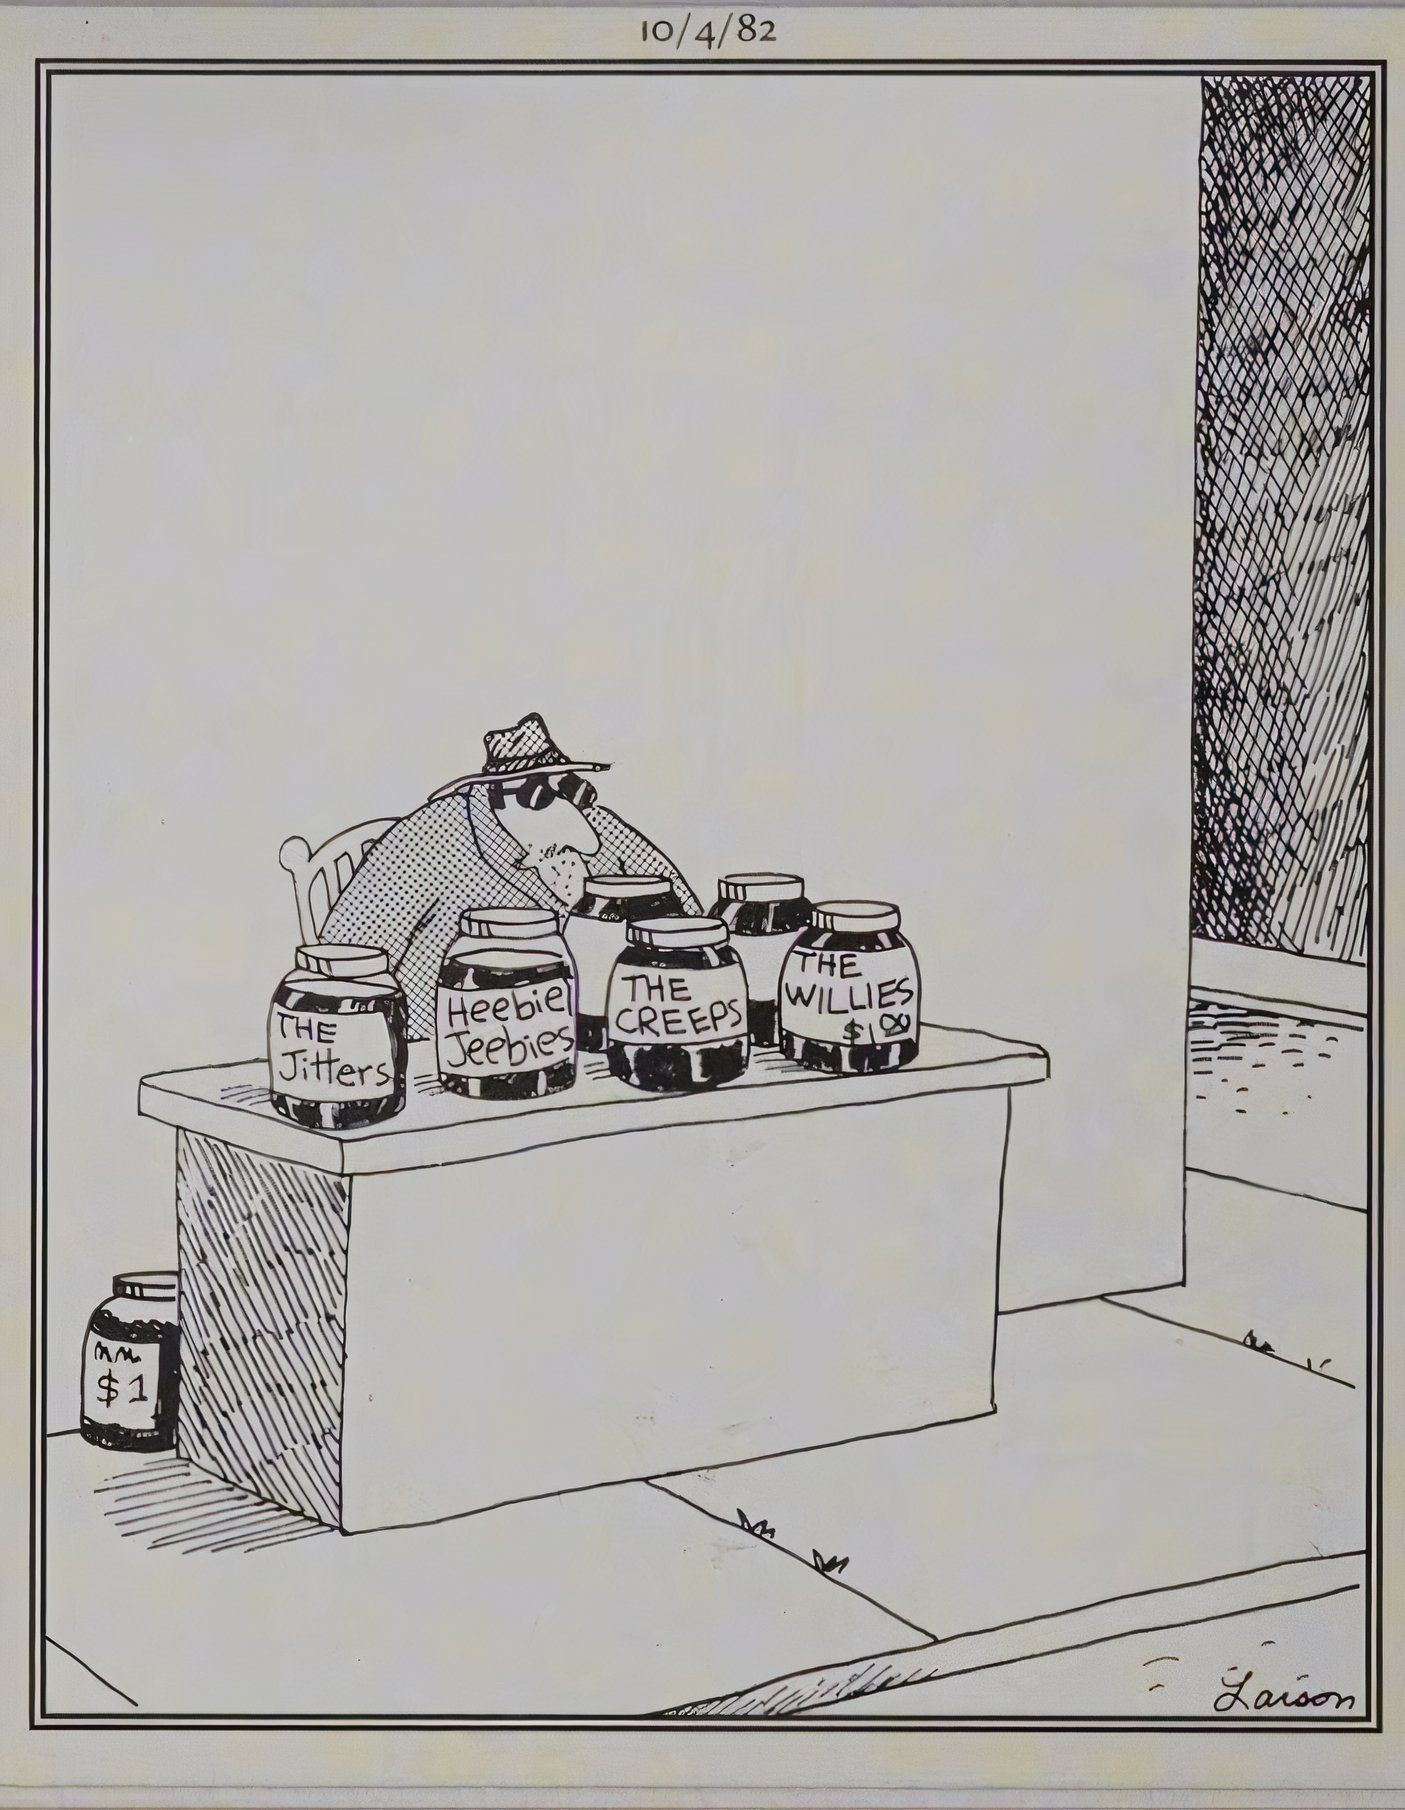 Far Side, man in trench coat selling jars of 'heebie jeebies' and 'willies' on the street-1